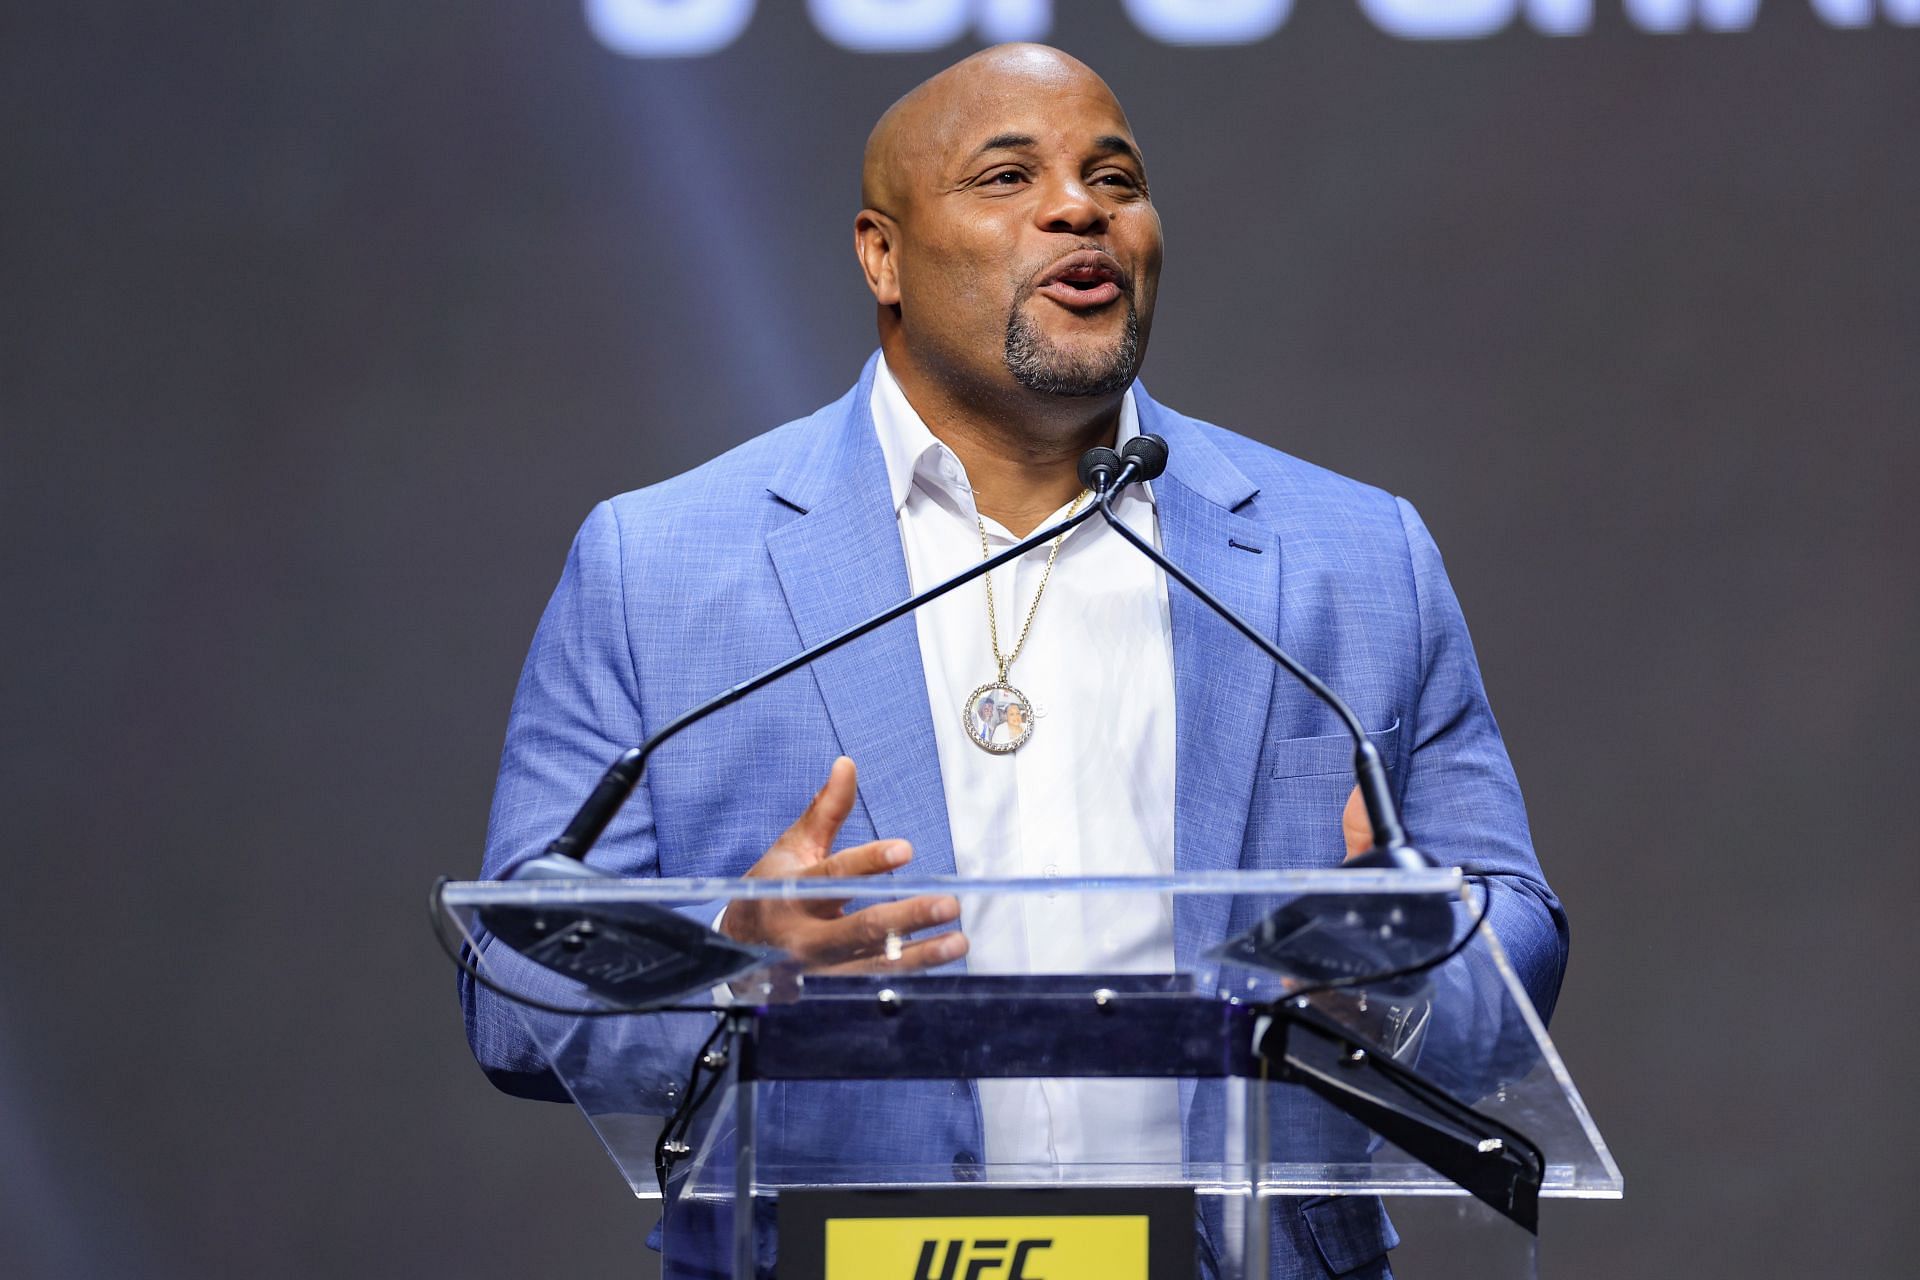 UFC Hall of Fame Class of 2022 Induction Ceremony